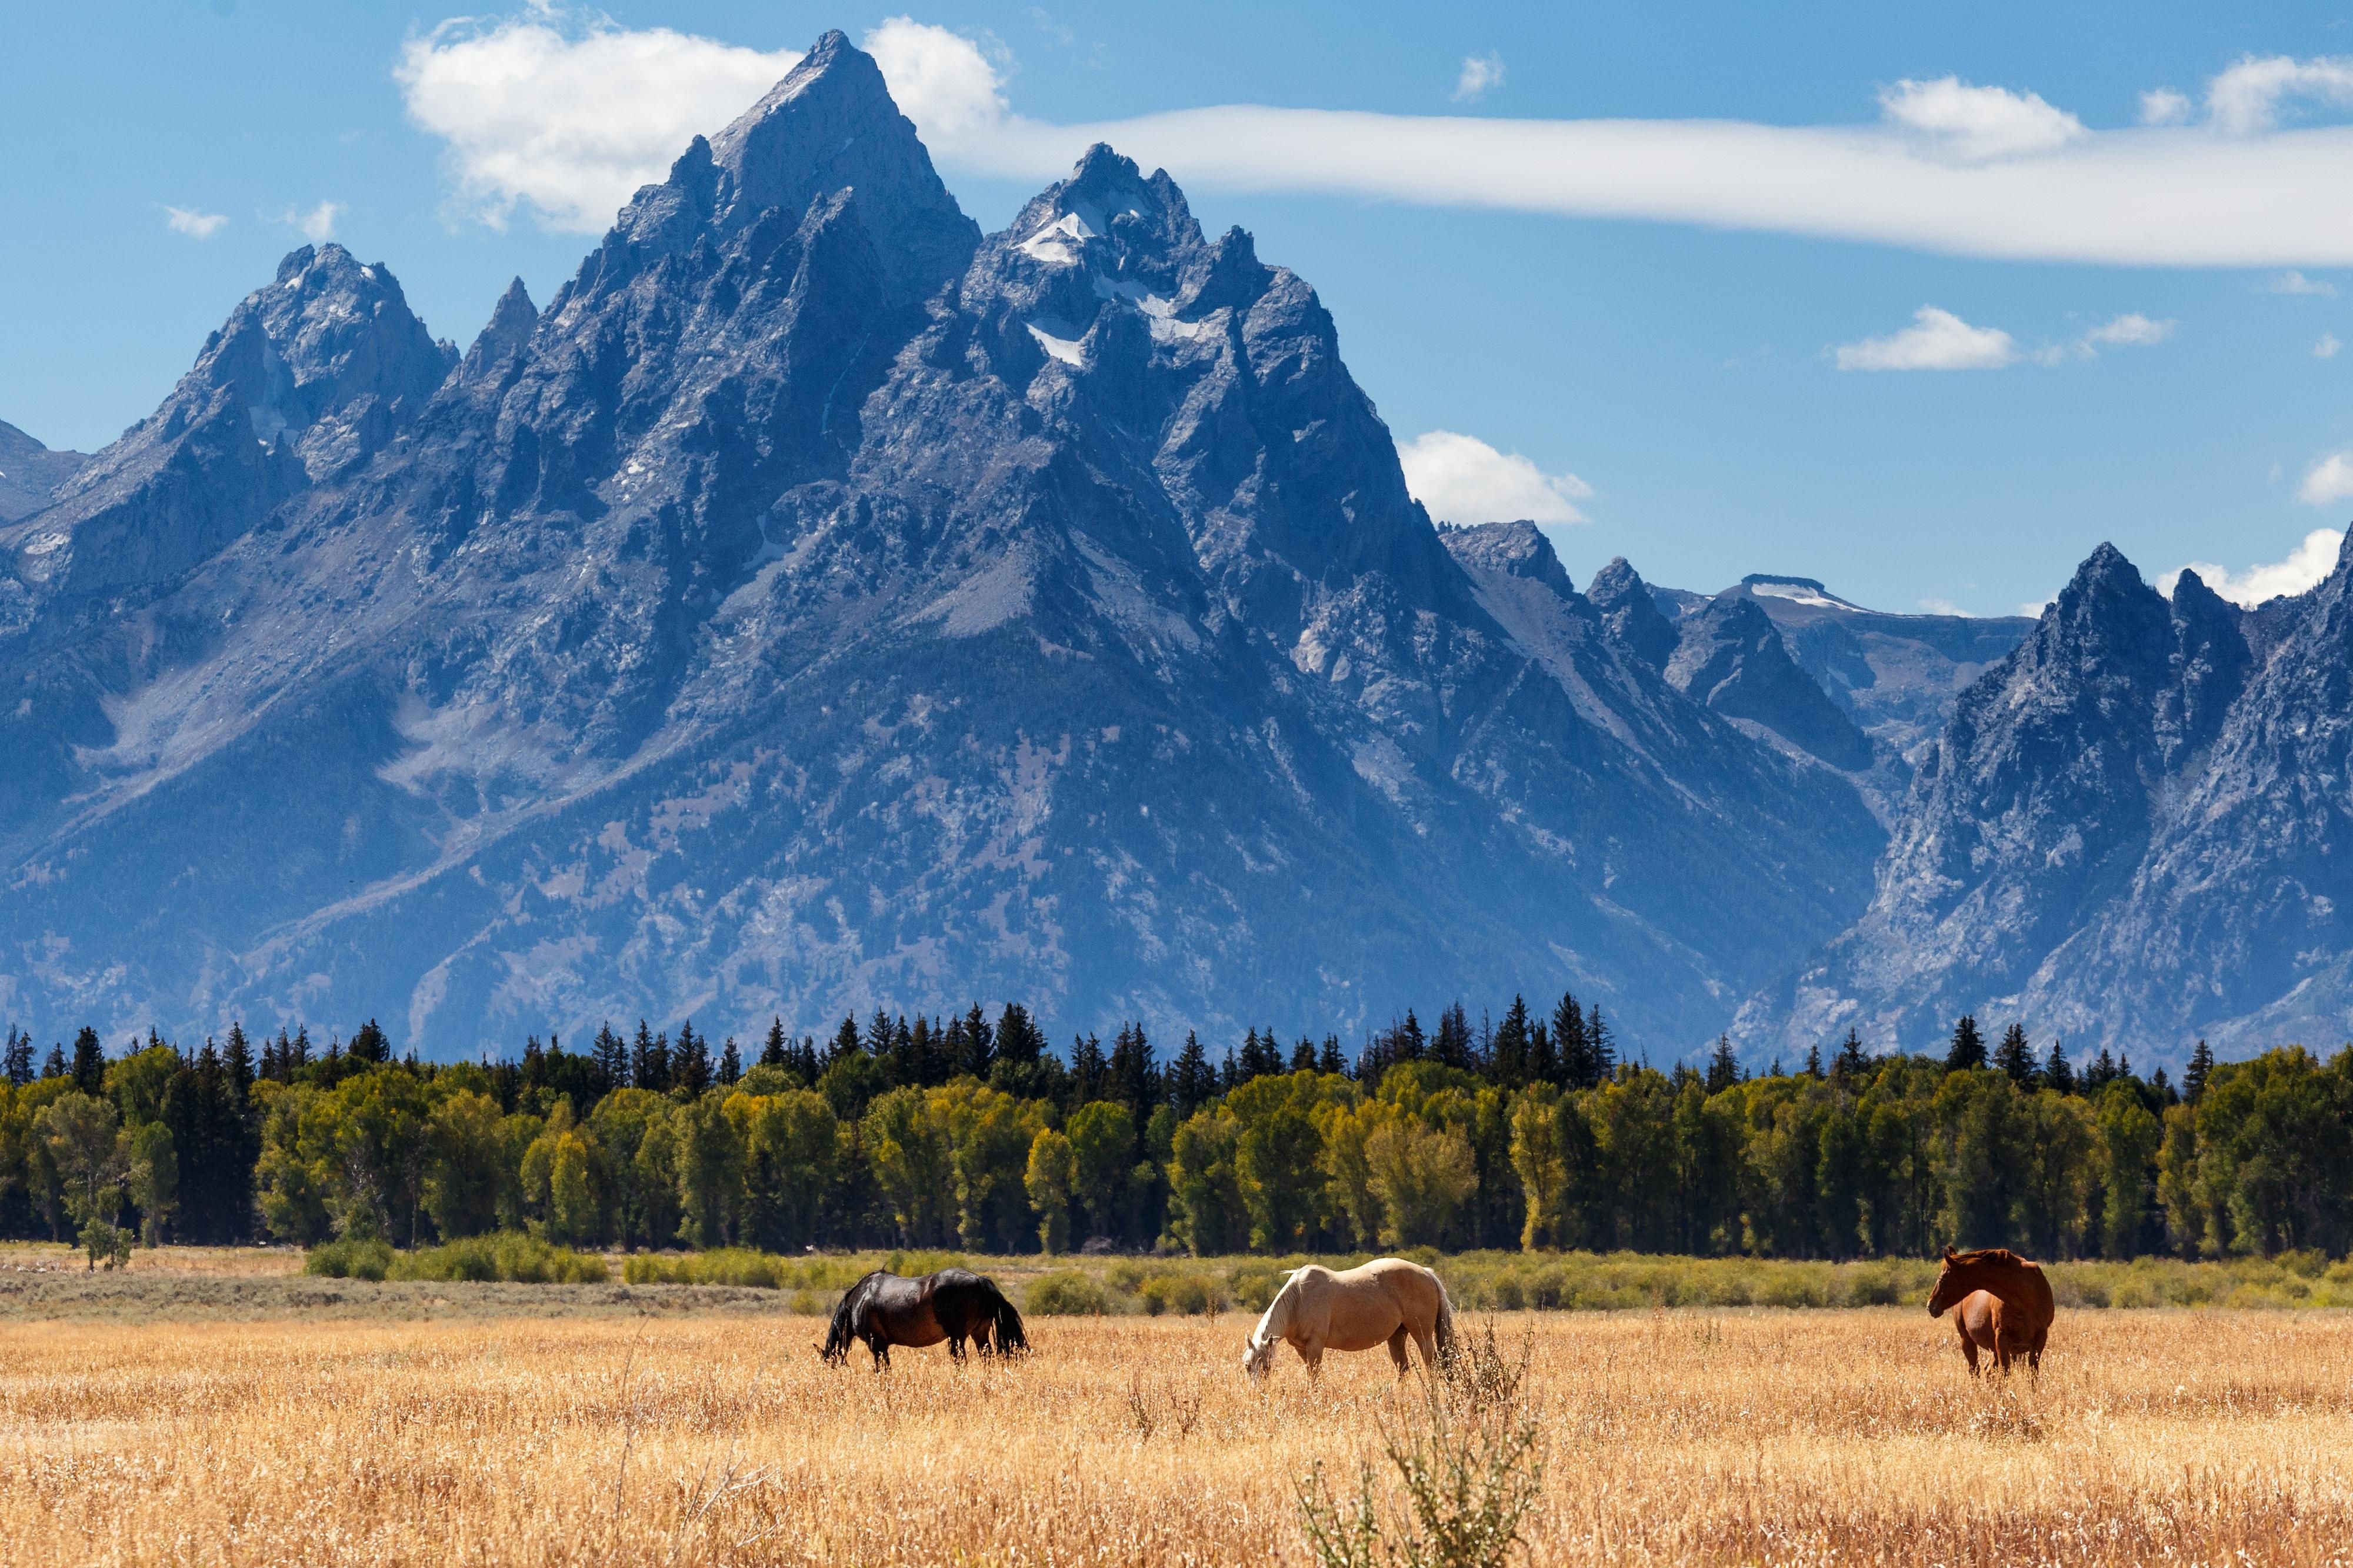 America in picture form. Grand Tetons National Park, Wyoming.